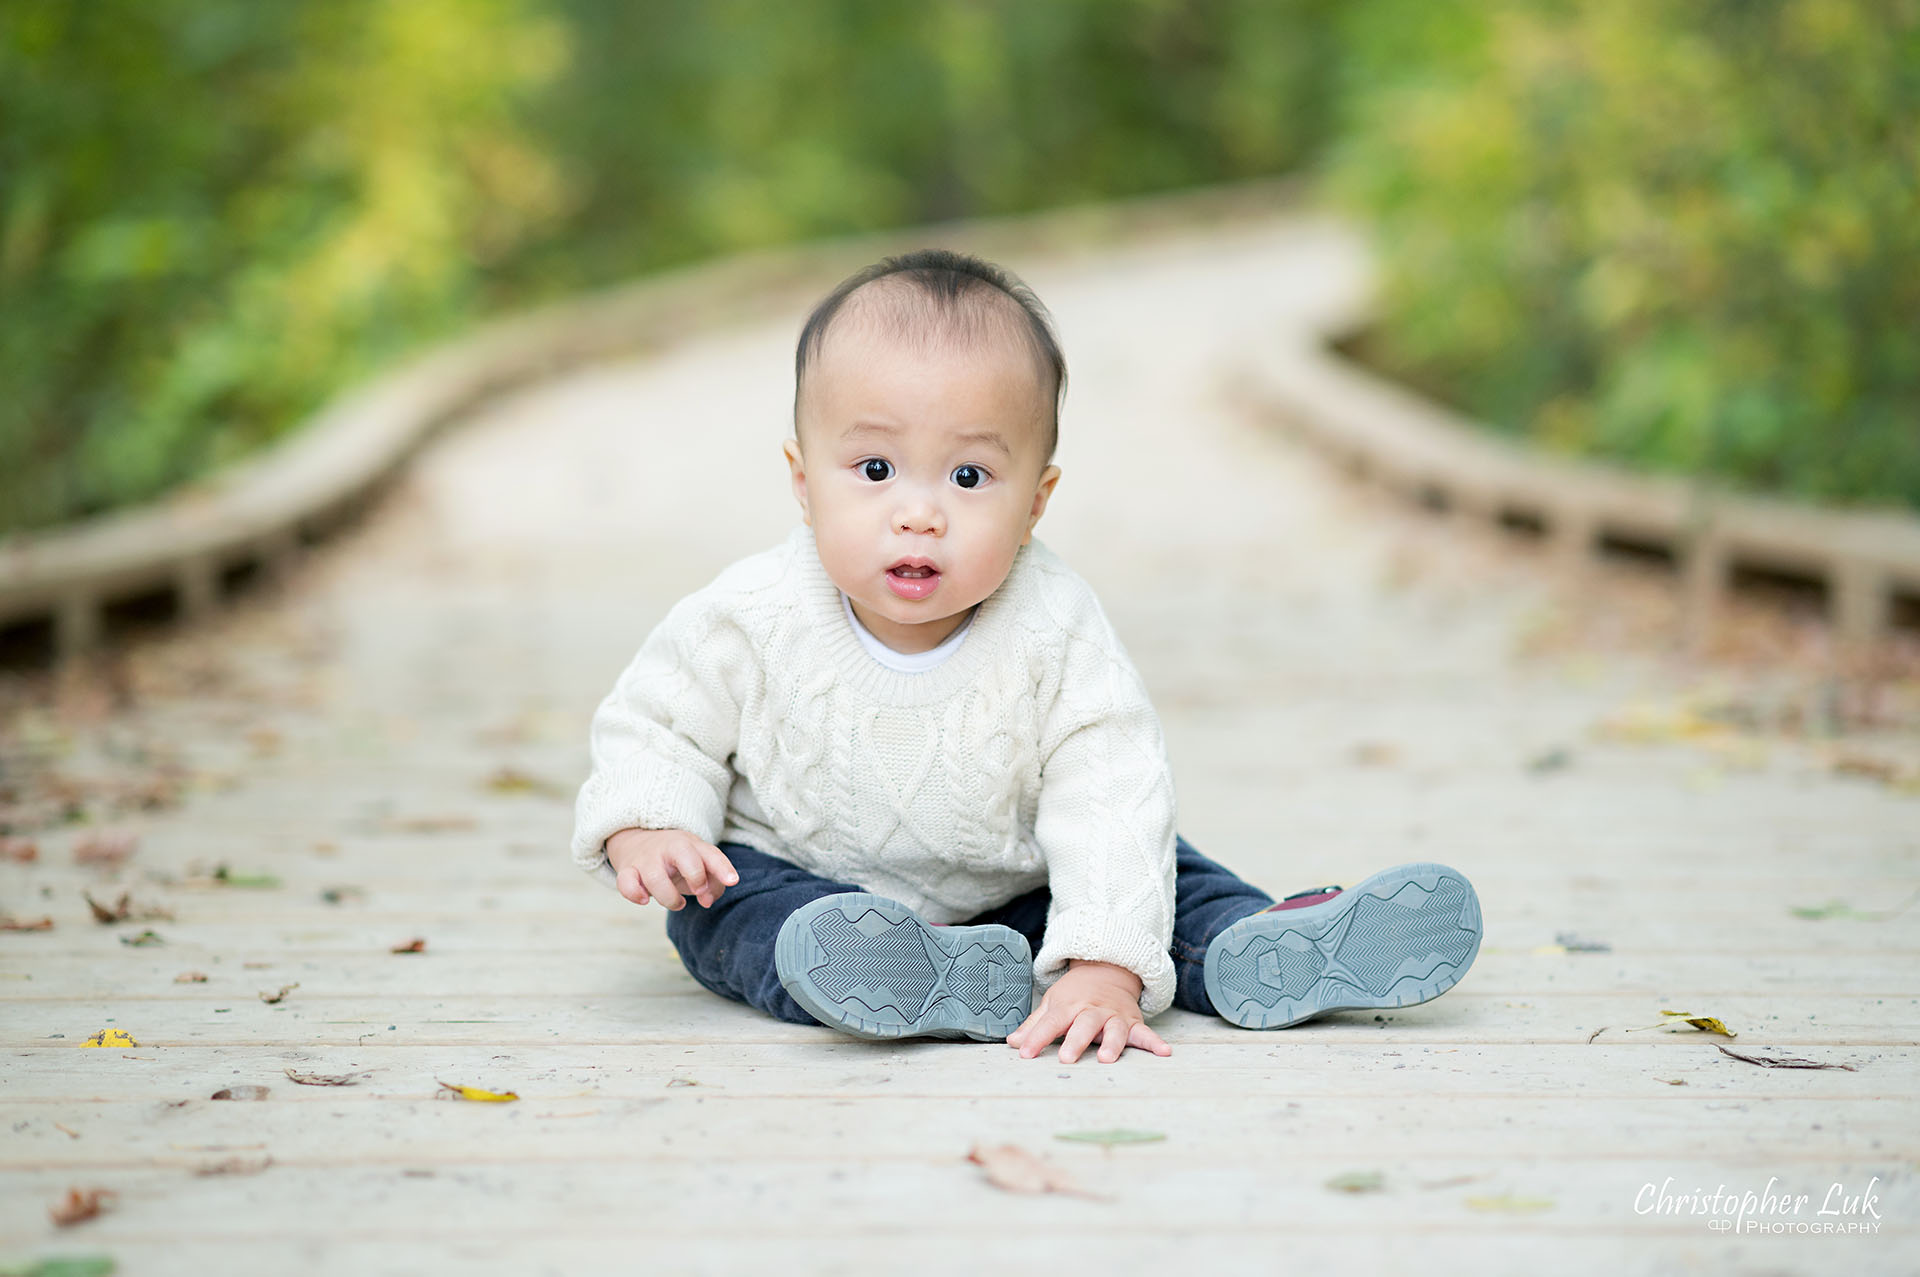 Christopher Luk Markham Family Photographer Autumn Leaves Fall Season Candid Photojournalistic Natural Bright Timeless Brother Son Sitting Baby Landscape